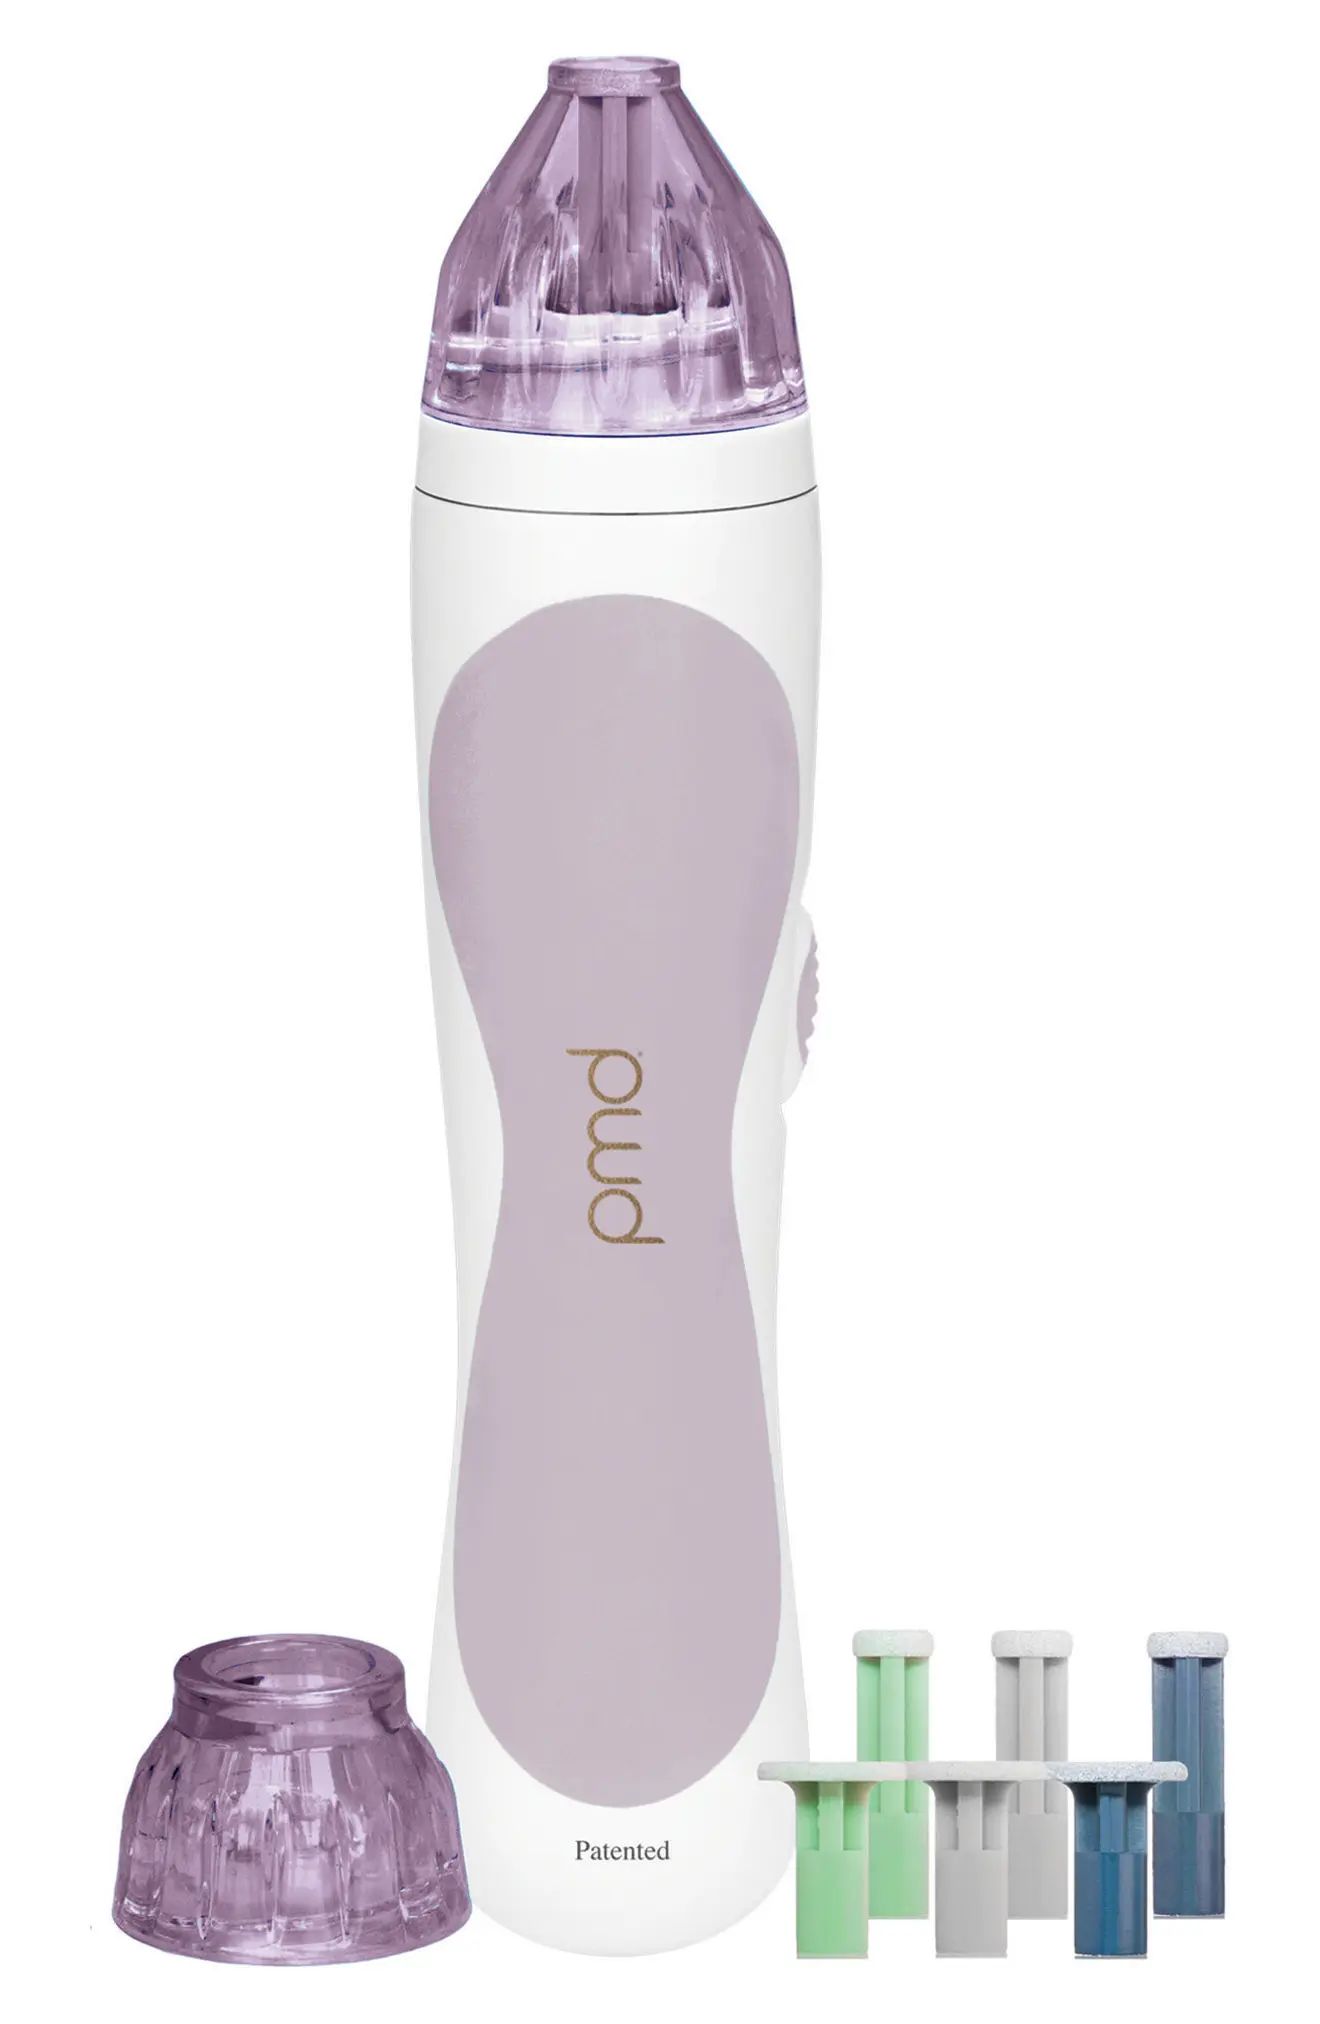 PMD Classic Personal Microderm Device | Nordstrom